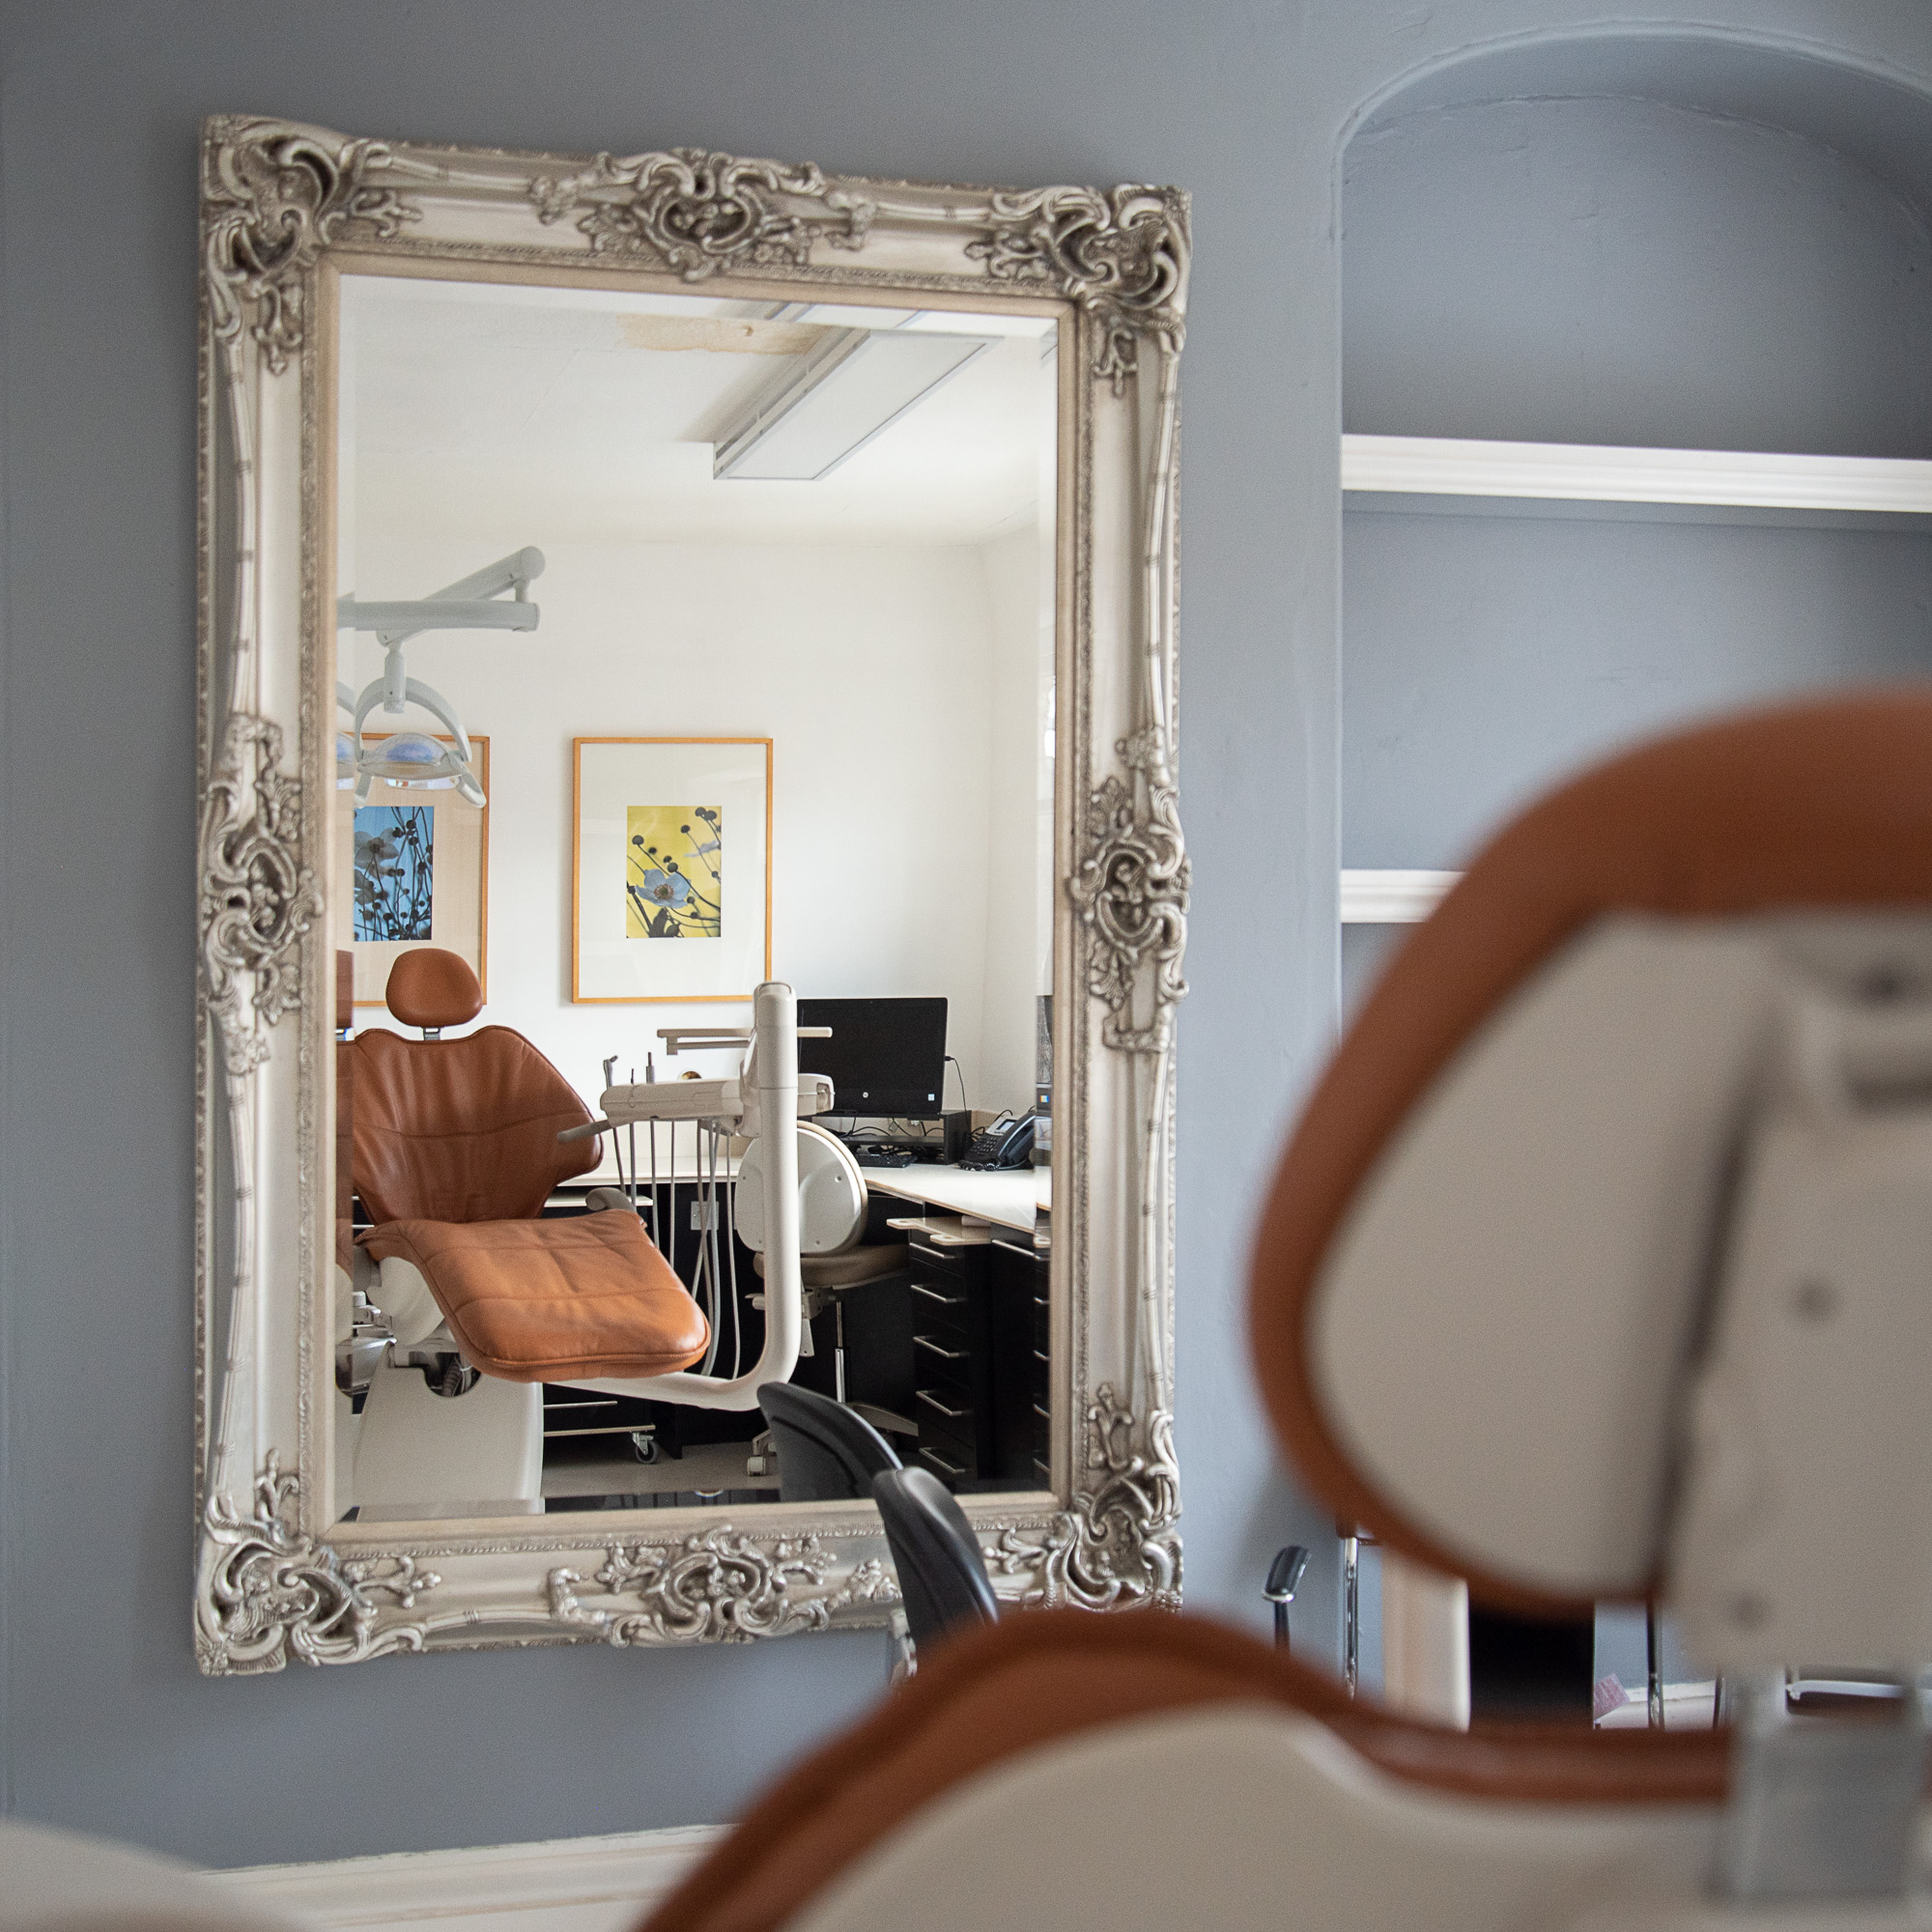 Dental Chair infront of mirror